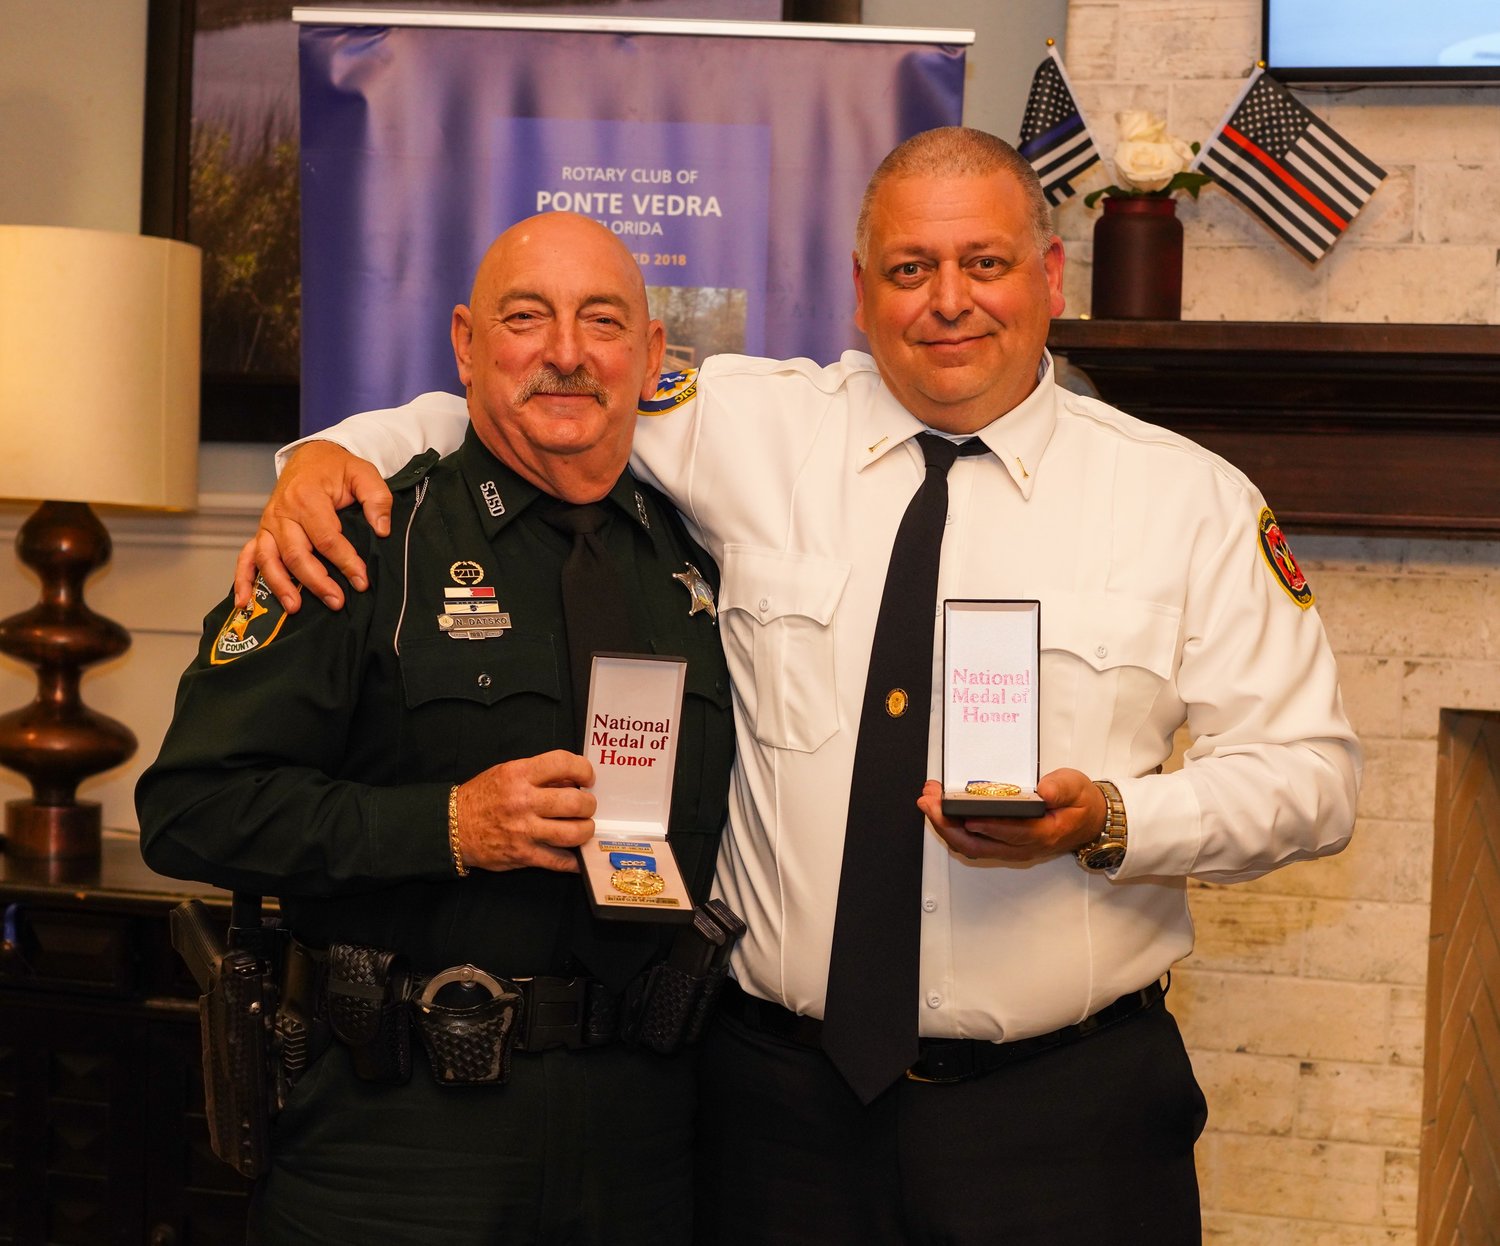 Senior Deputy Nate Datsko, left, and Lt. Mike Pepper have received the Rotary Club of Ponte Vedra’s Rotary Heroes Awards.